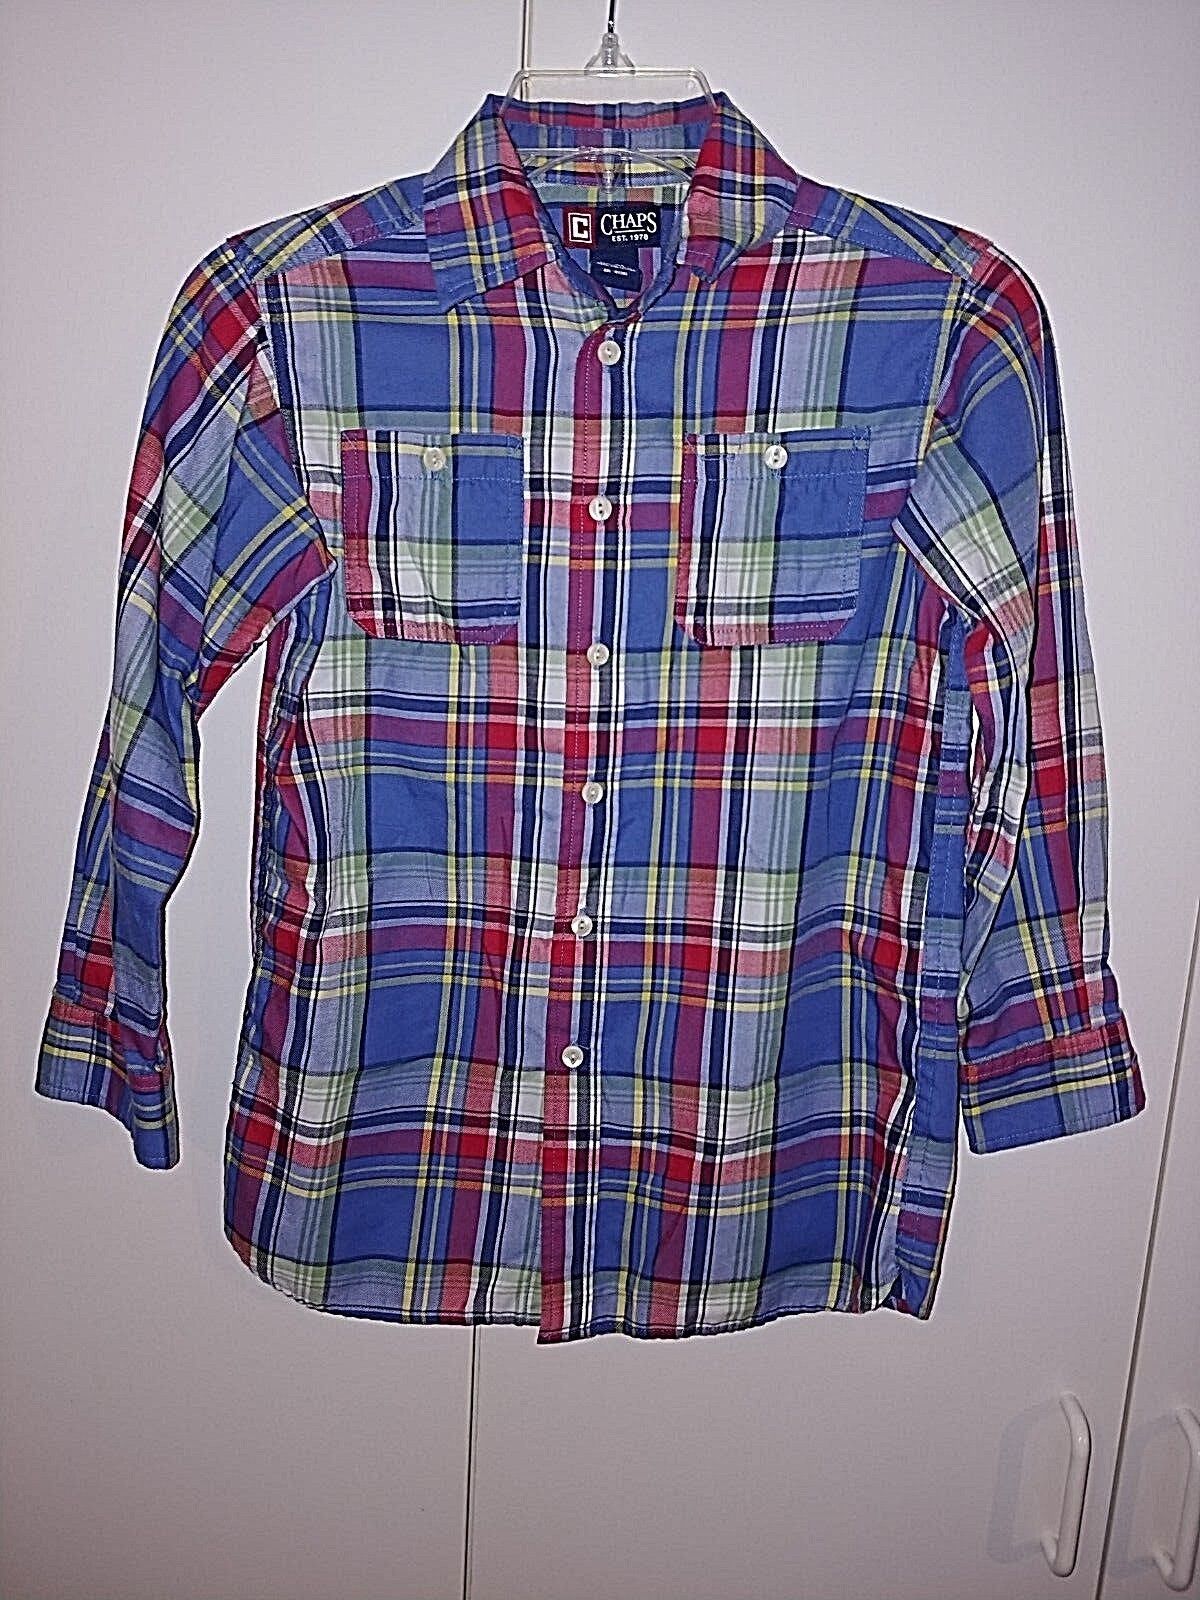 Primary image for CHAPS BOY'S LS PLAID BUTTON COTTON/POLYESTER SHIRT-8-BARELY WORN-NICE